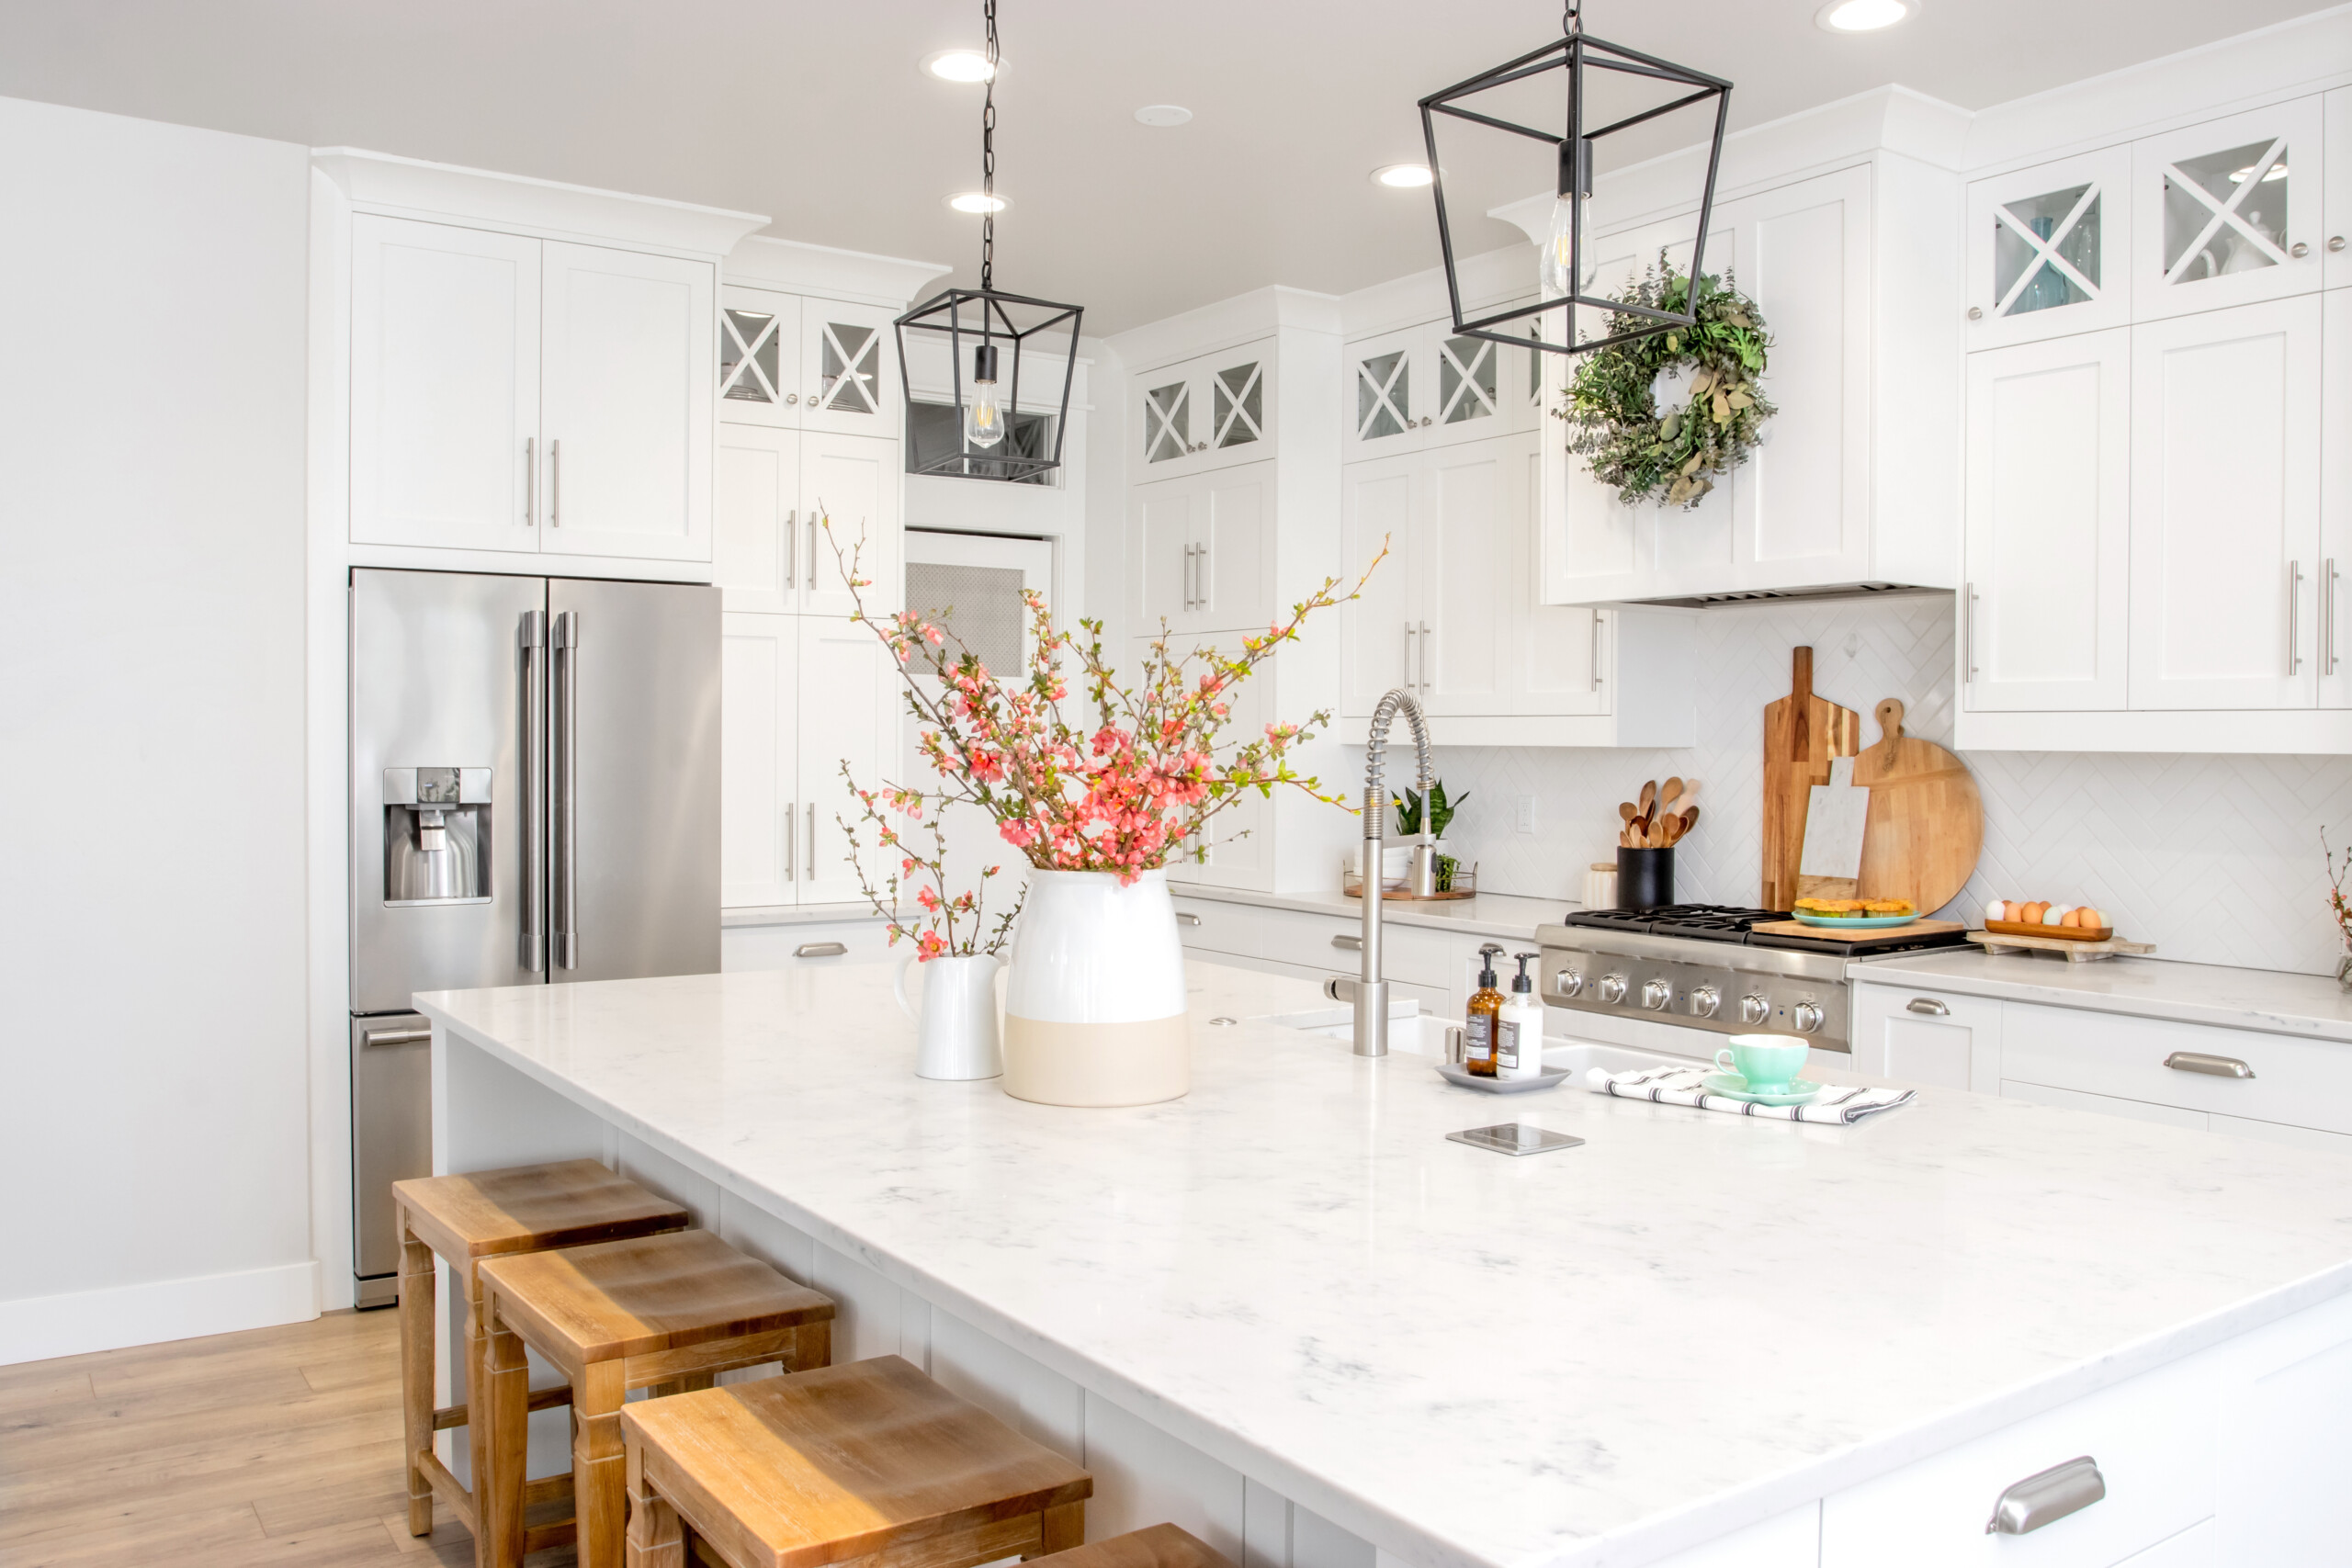 Kitchen Renovation Trends   Get Inspired By The Top 25   Décor Aid